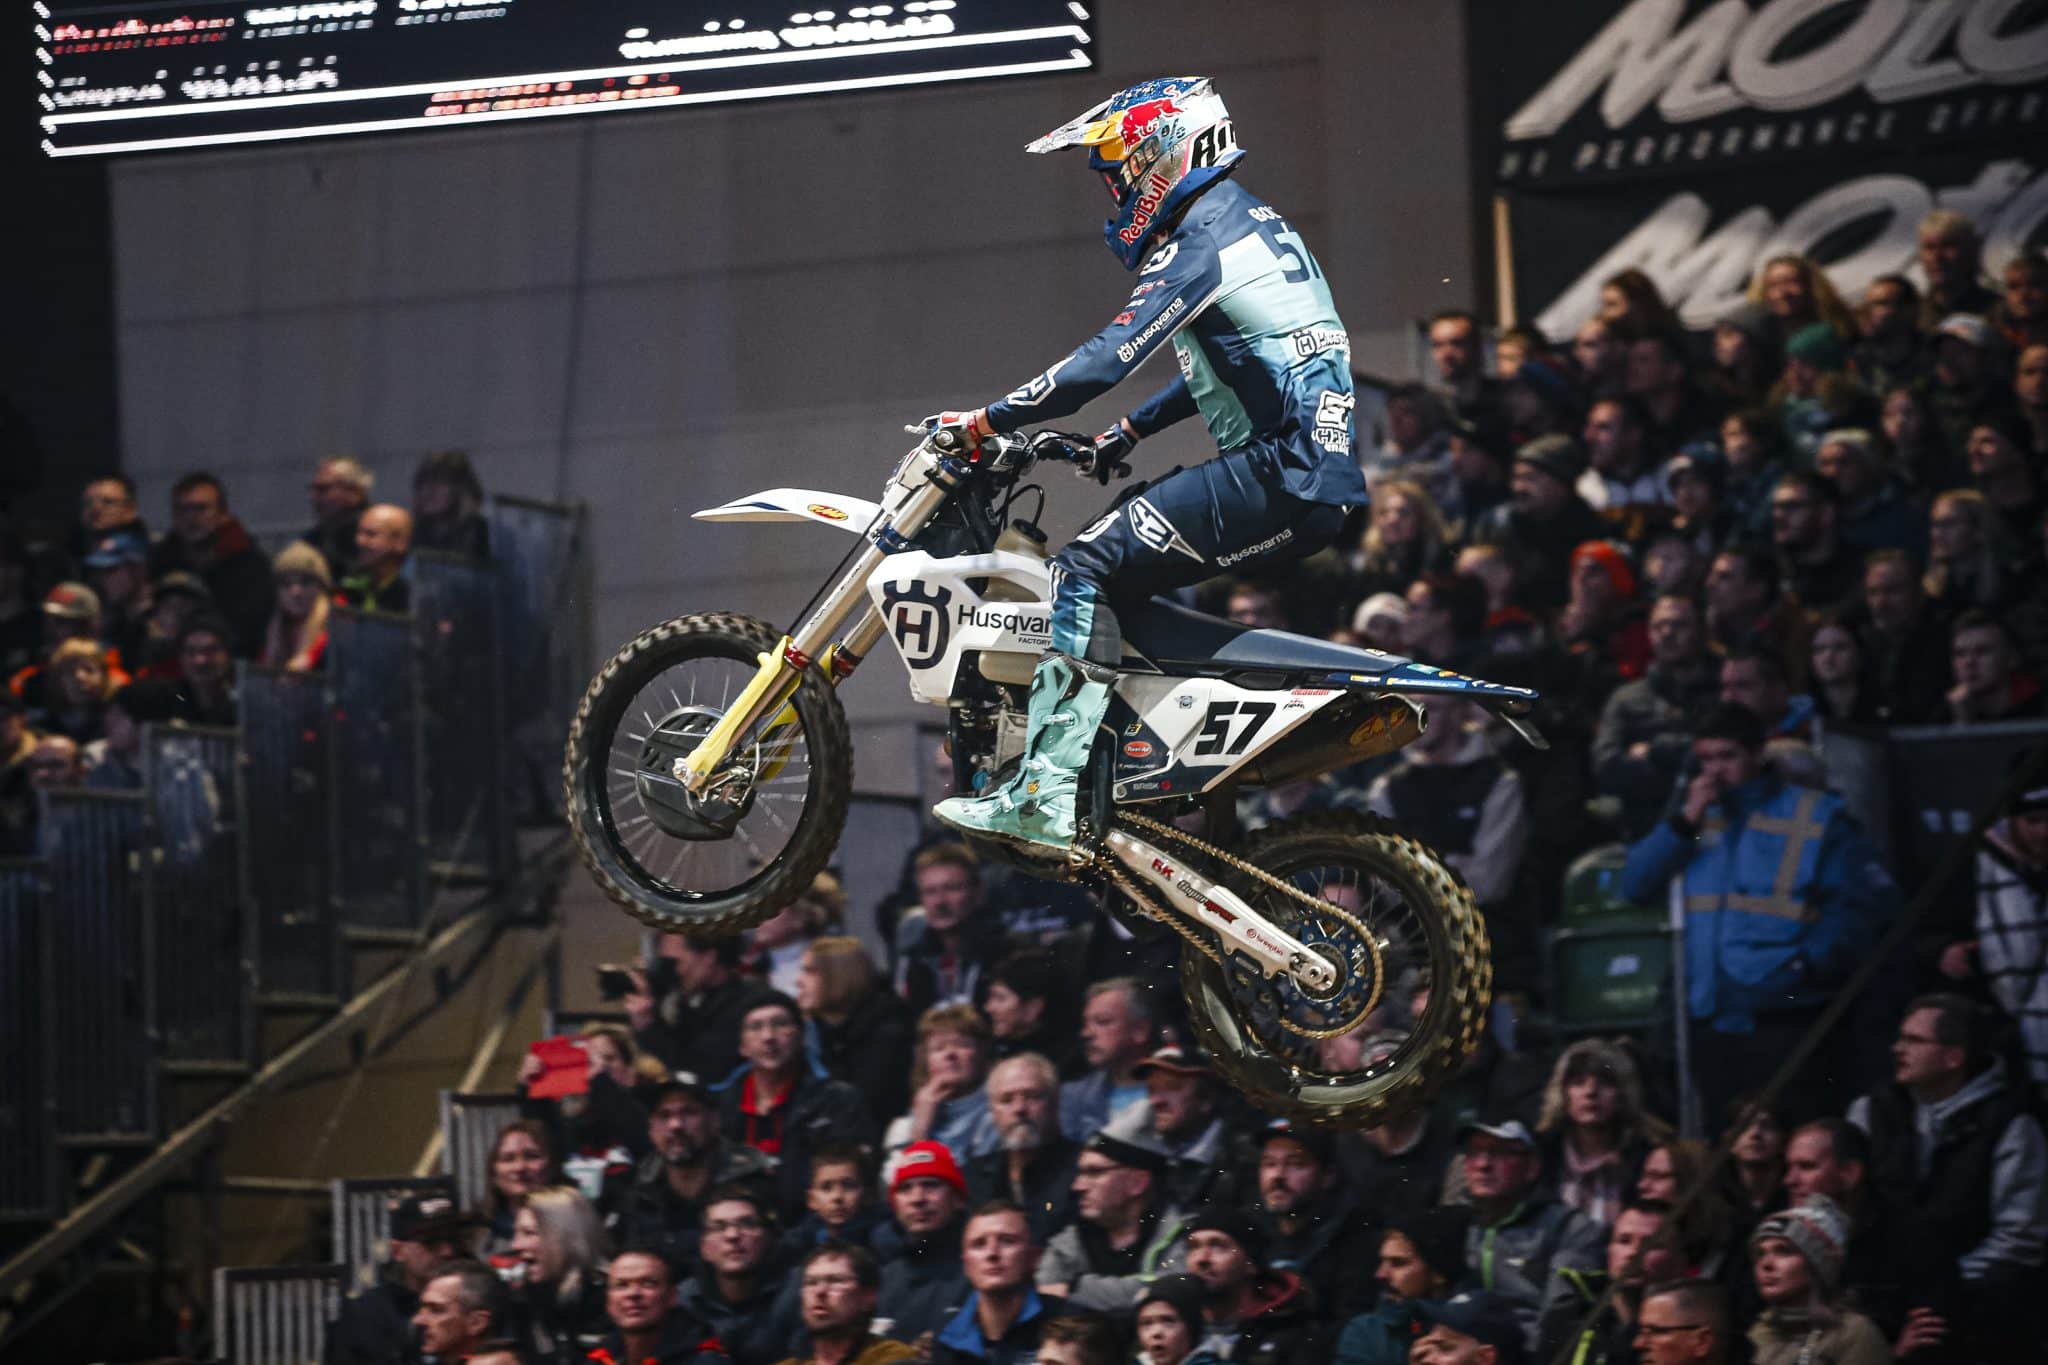 BILY BOLT ON TOP AGAIN AT  SUPERENDURO IN GERMANY